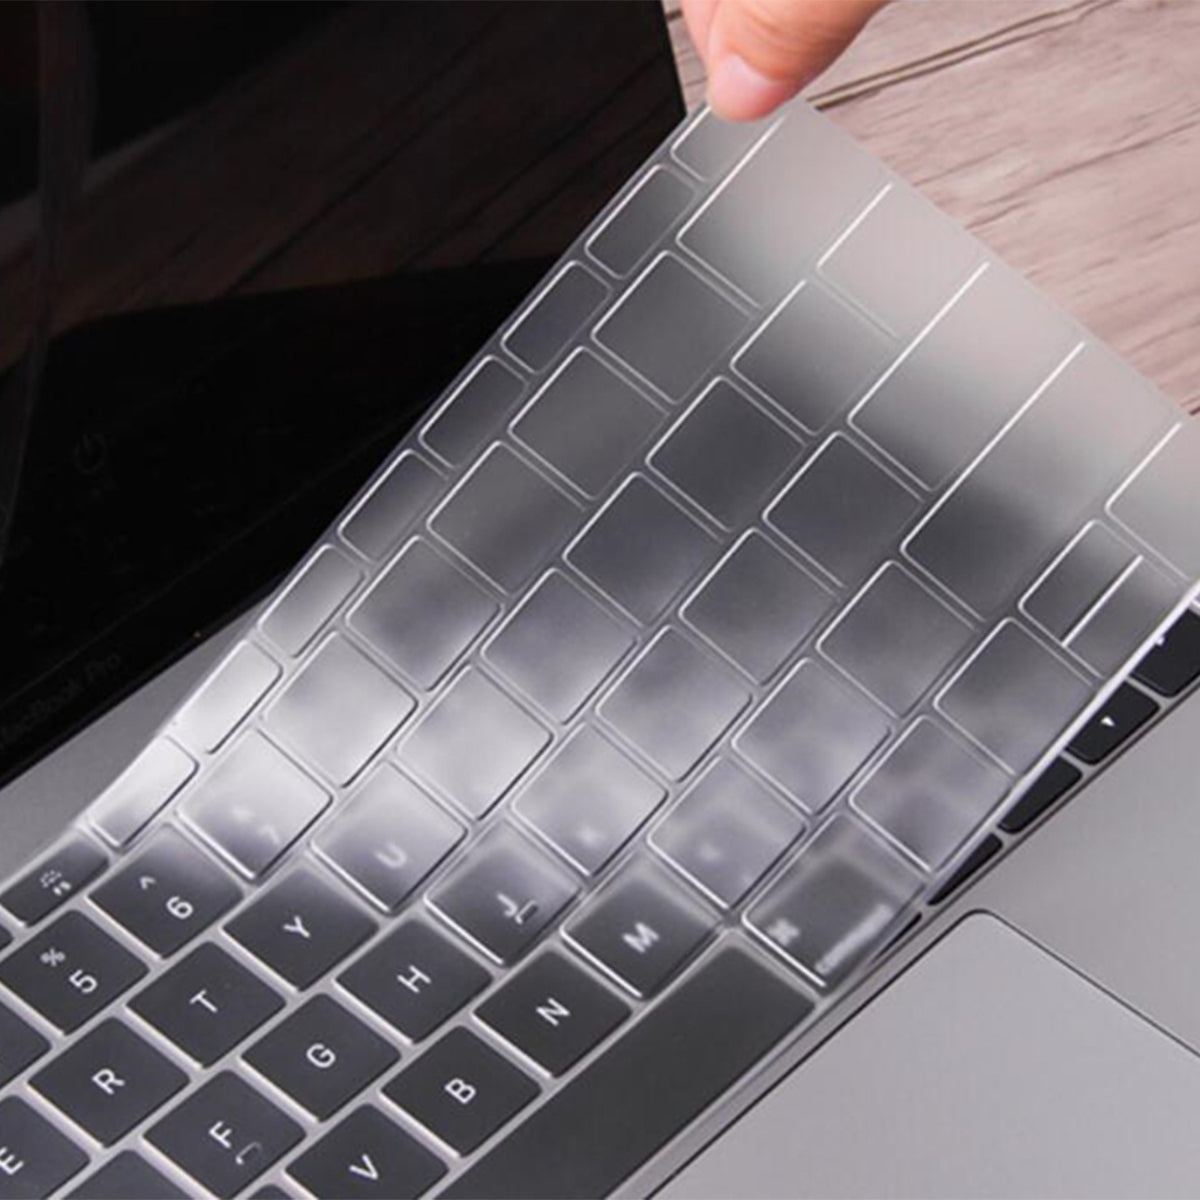 Quality Keyboard Cover Soft TPU Keyboard Protector for MacBook Pro 16inch (A2141) 2019